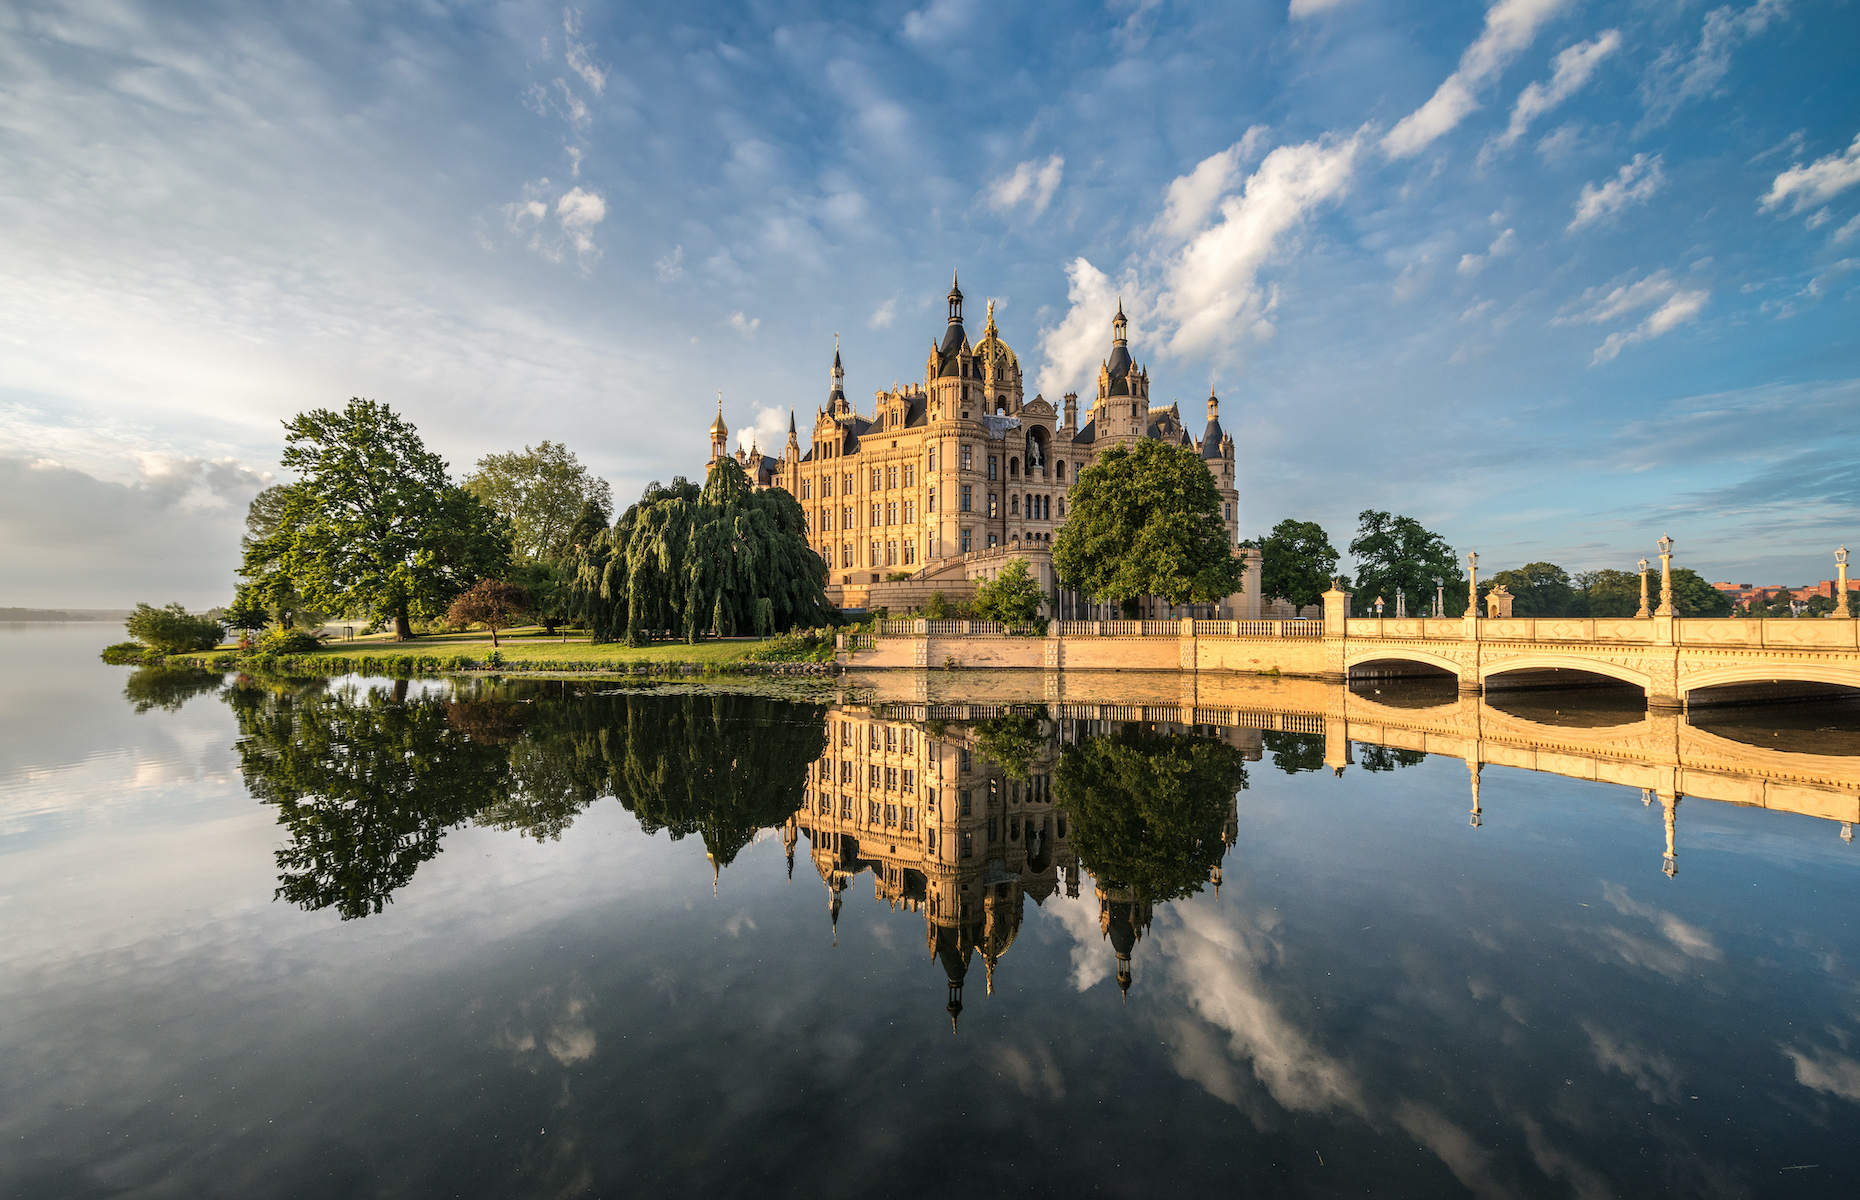 This sublime palace with more than 650 rooms is also the seat of the Mecklenburg-Vorpommern parliament. Discover <a href="https://www.schwerin.de/en/visit-schwerin/attractions/schwerin-castle/" rel="noreferrer noopener">Schwerin Castle</a>’s fabulous baroque gardens and orangery during your visit. Less than two hours by car from Hamburg and two and a half hours from Berlin, this German attraction is well worth the trip.